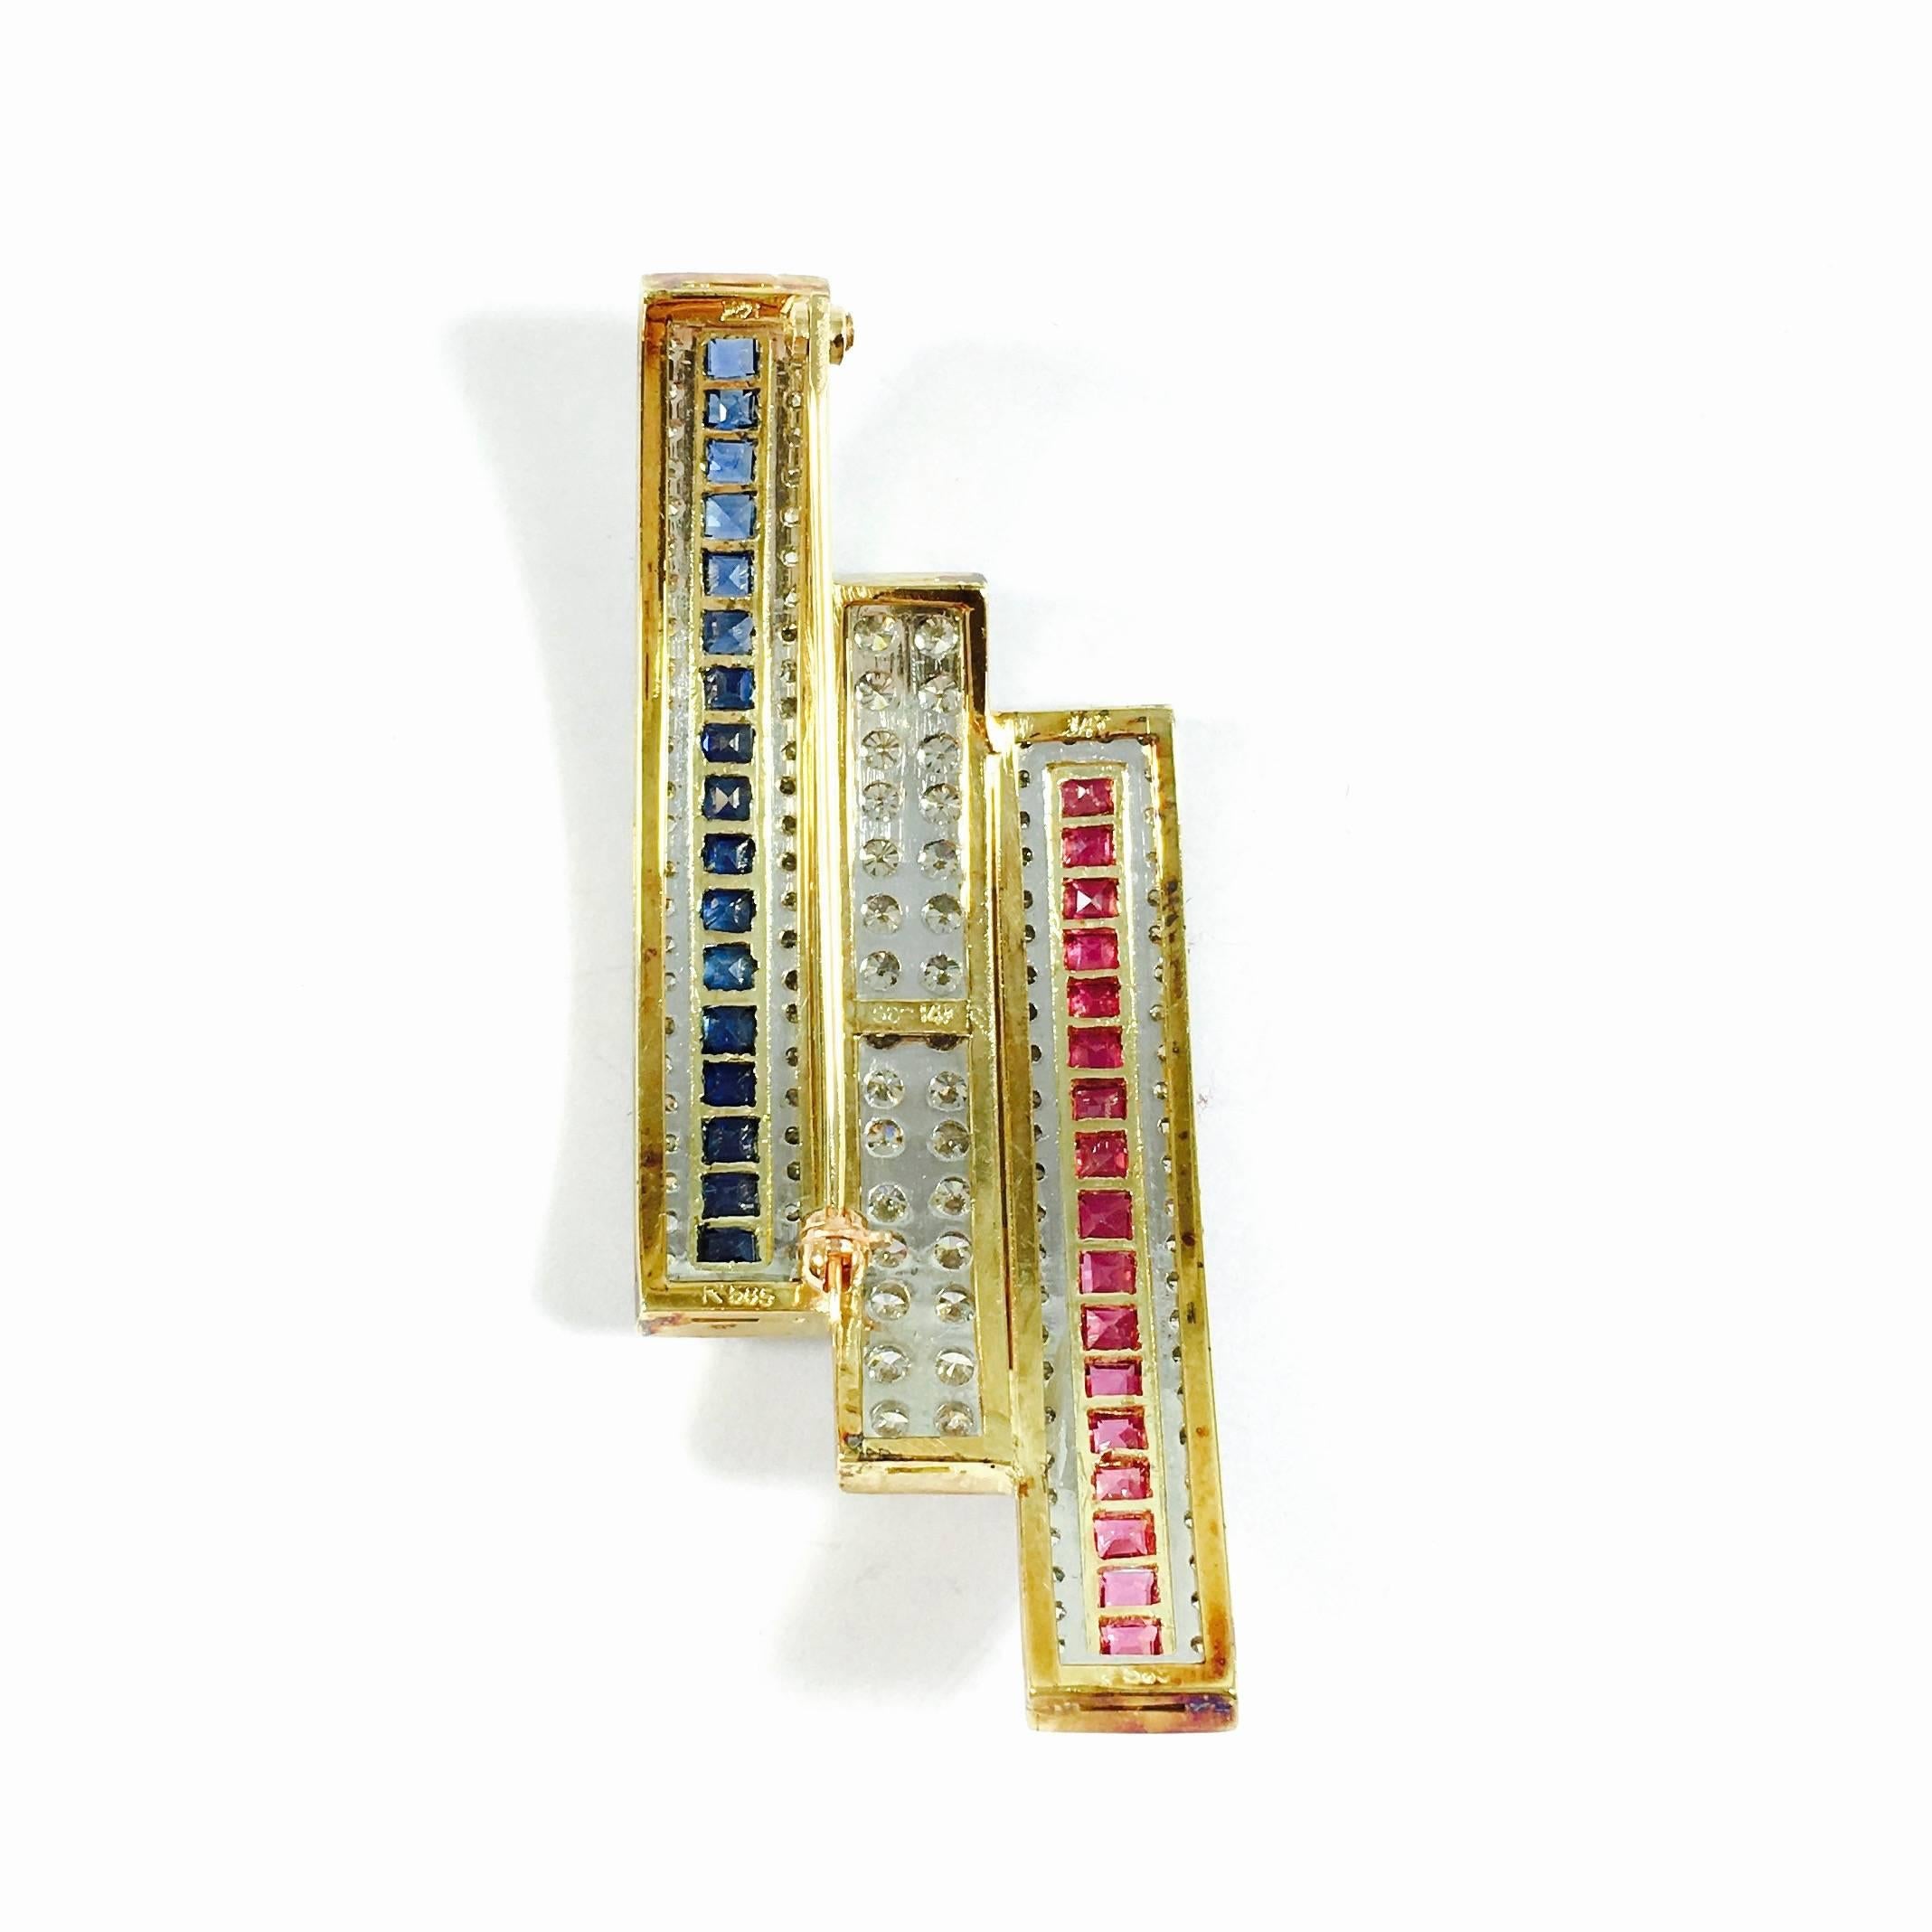 Featuring a unique, curved design, the pin is composed of three 14K gold bars set with rubies, diamonds and blue sapphires. 
17 square cut natural rubies: approximate total weight of 1.00 ct
17 square cut natural blue sapphires: approximate total